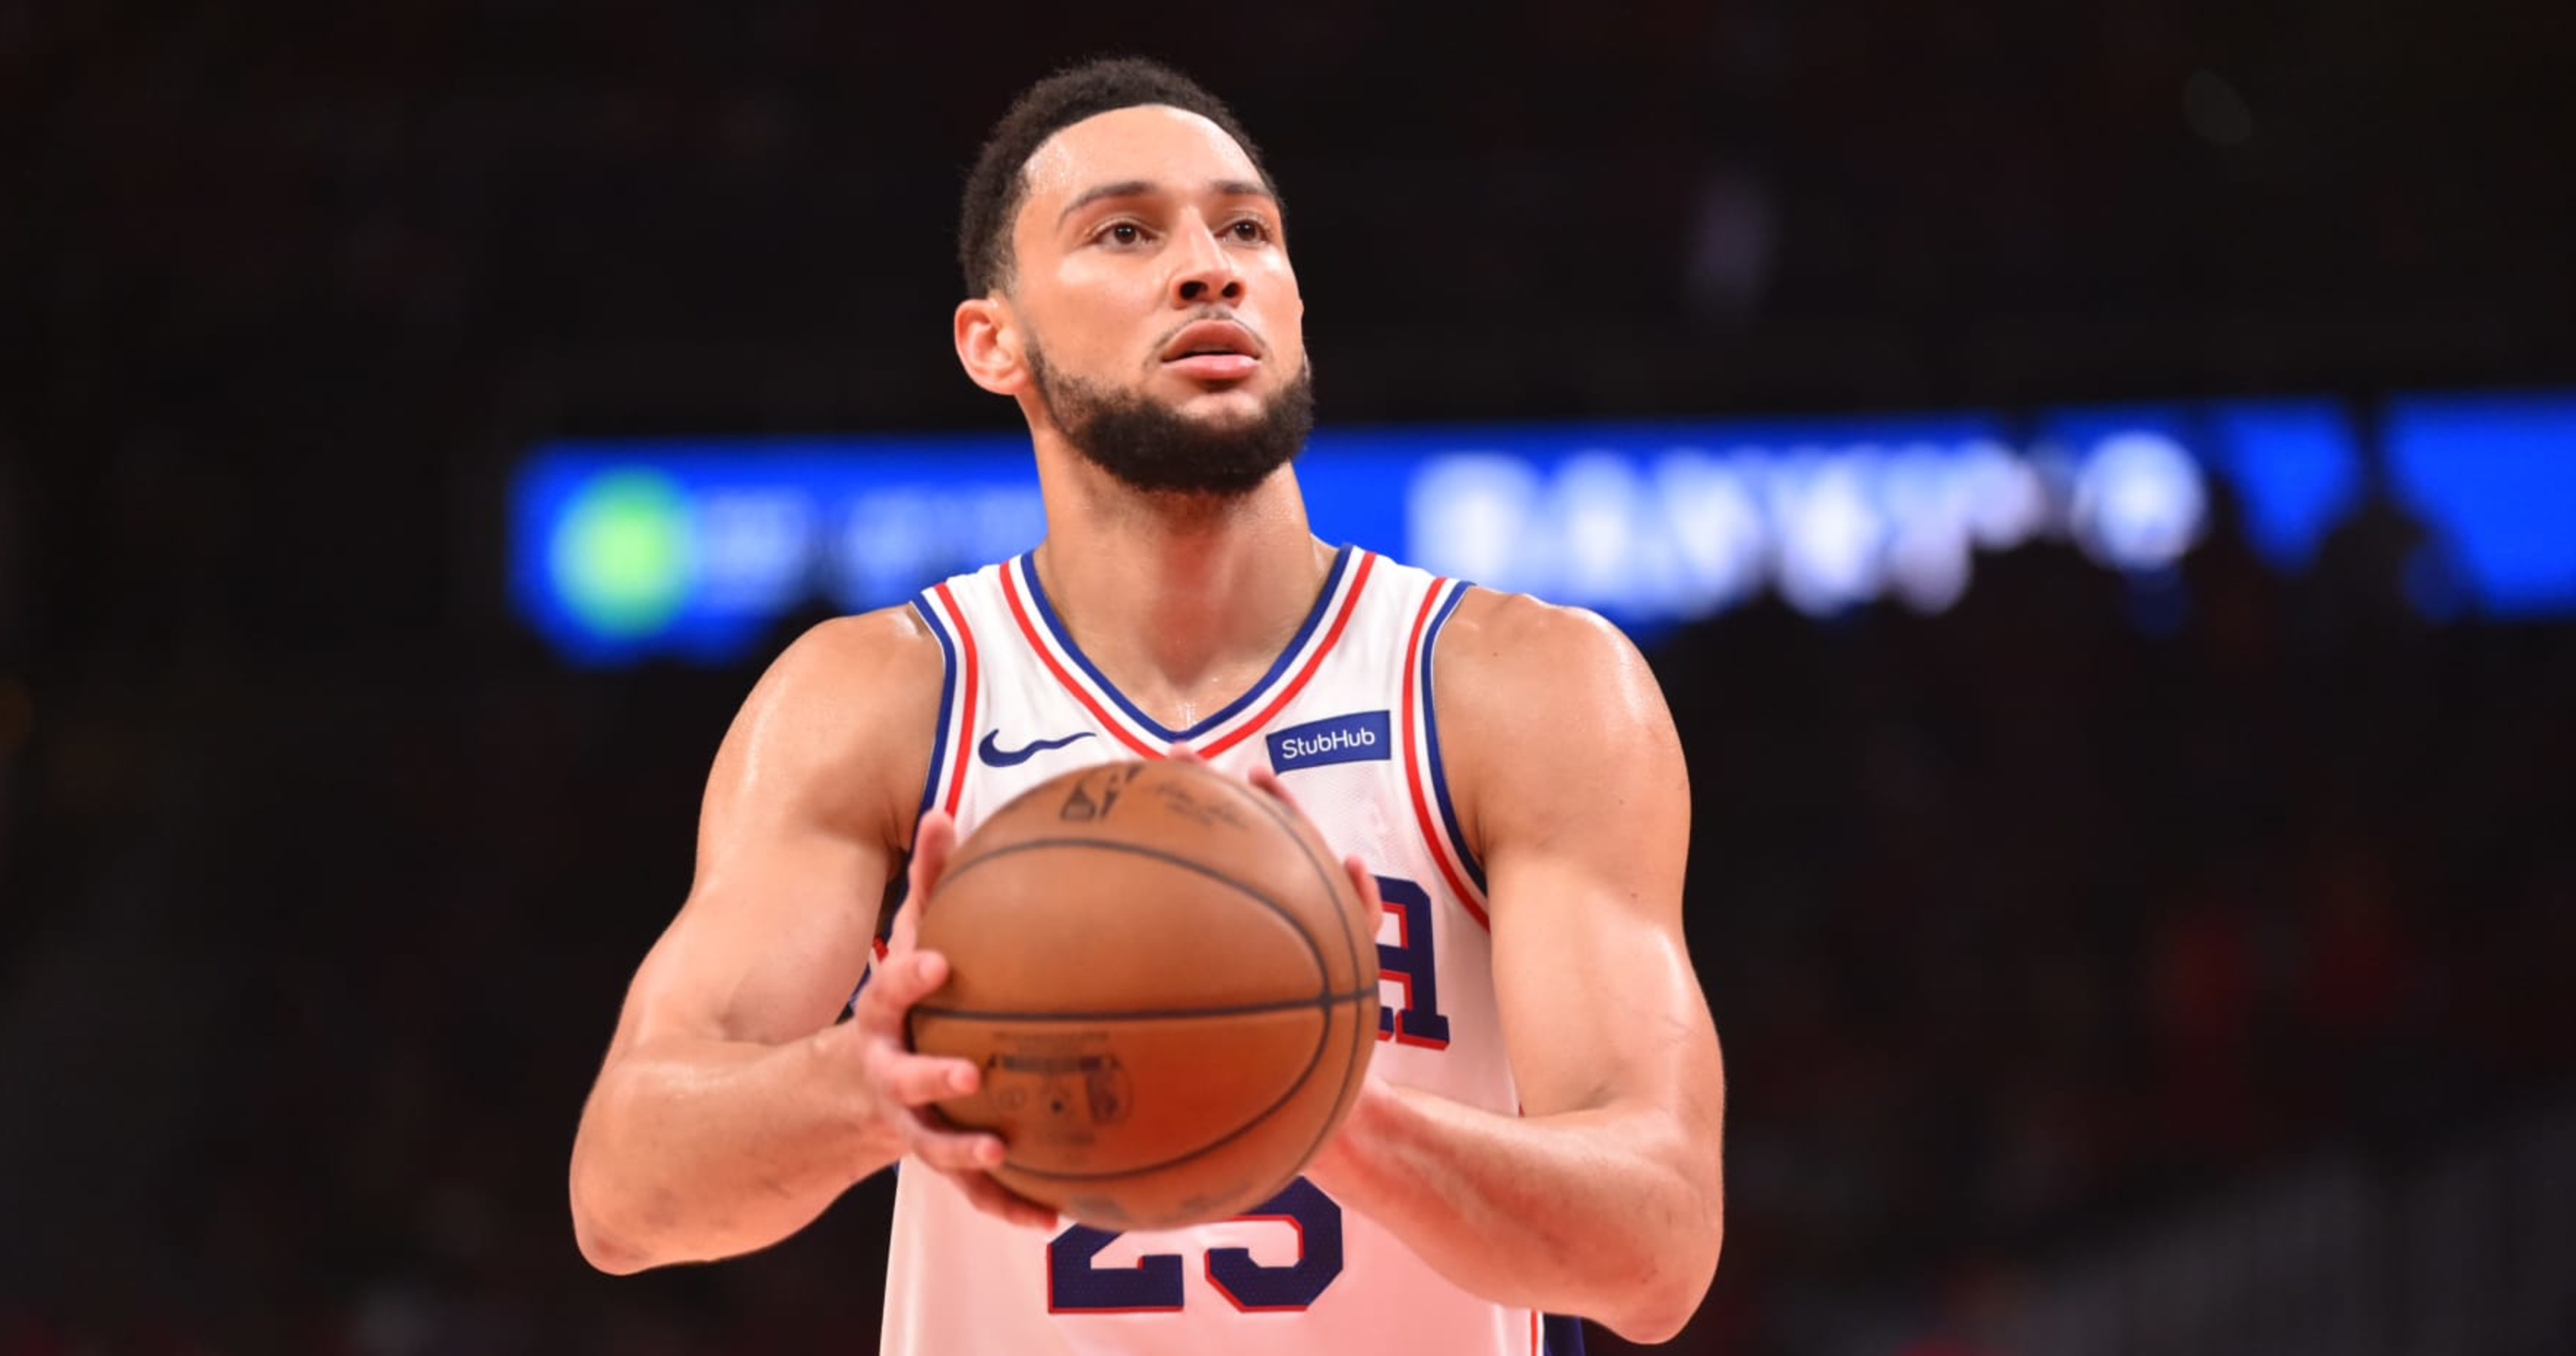 Ben Simmons knows he's not a great shooter: 'I am getting better